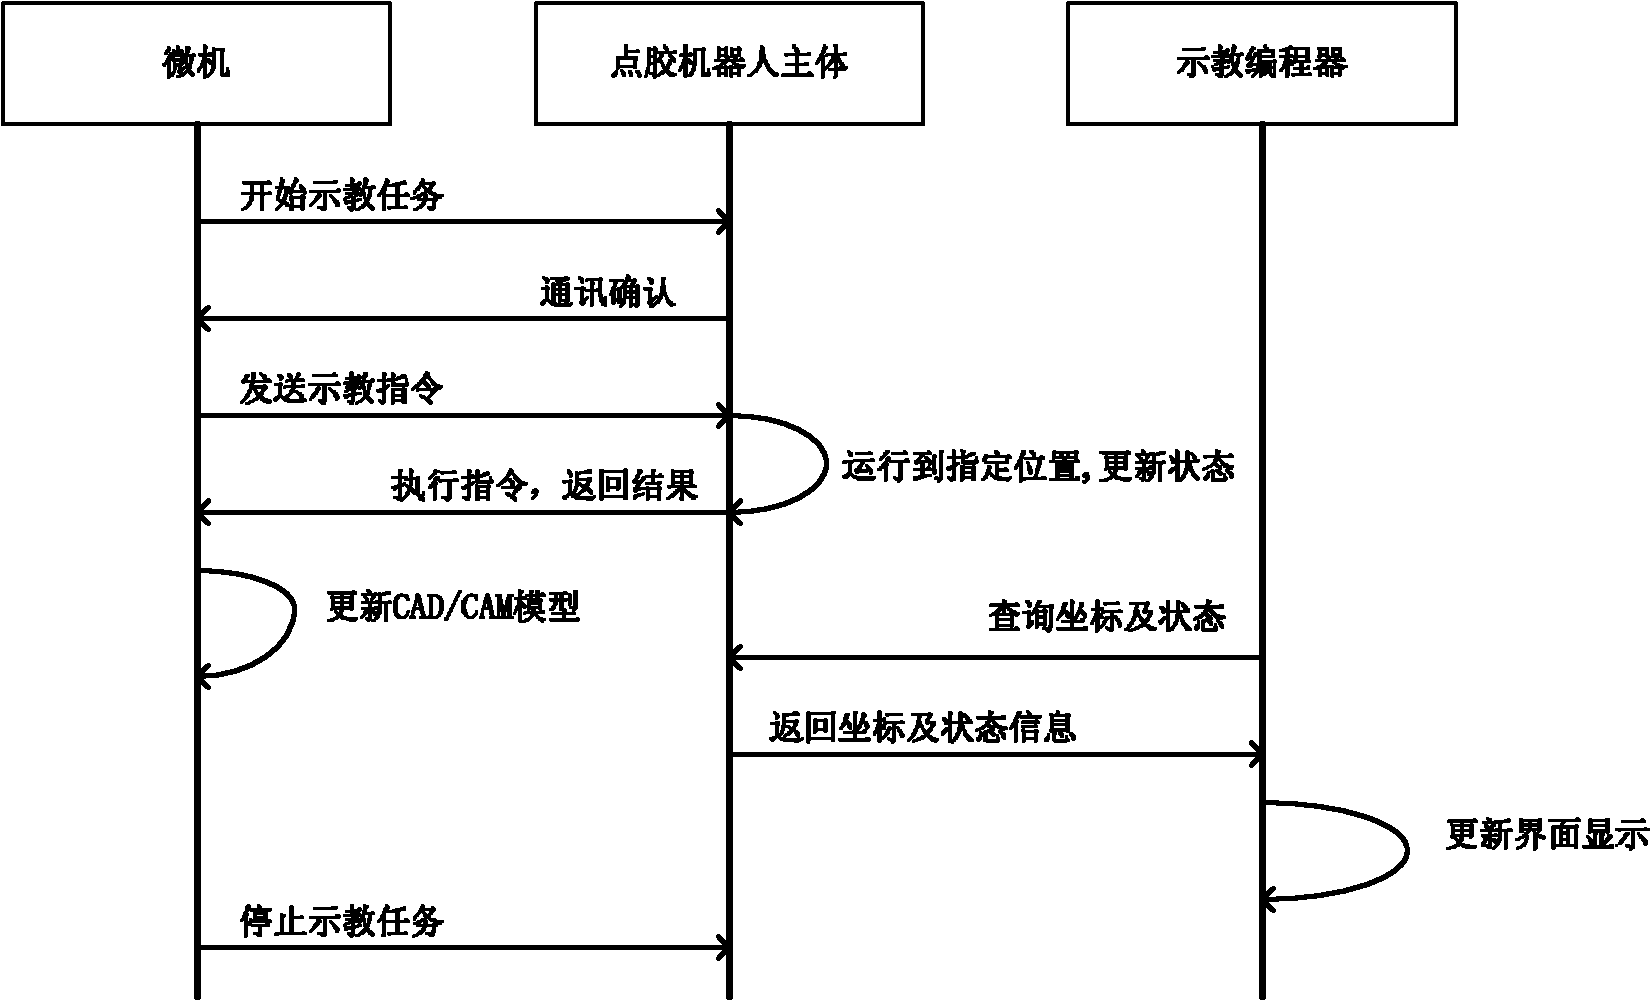 Online teaching processing system for glue dispensing machine